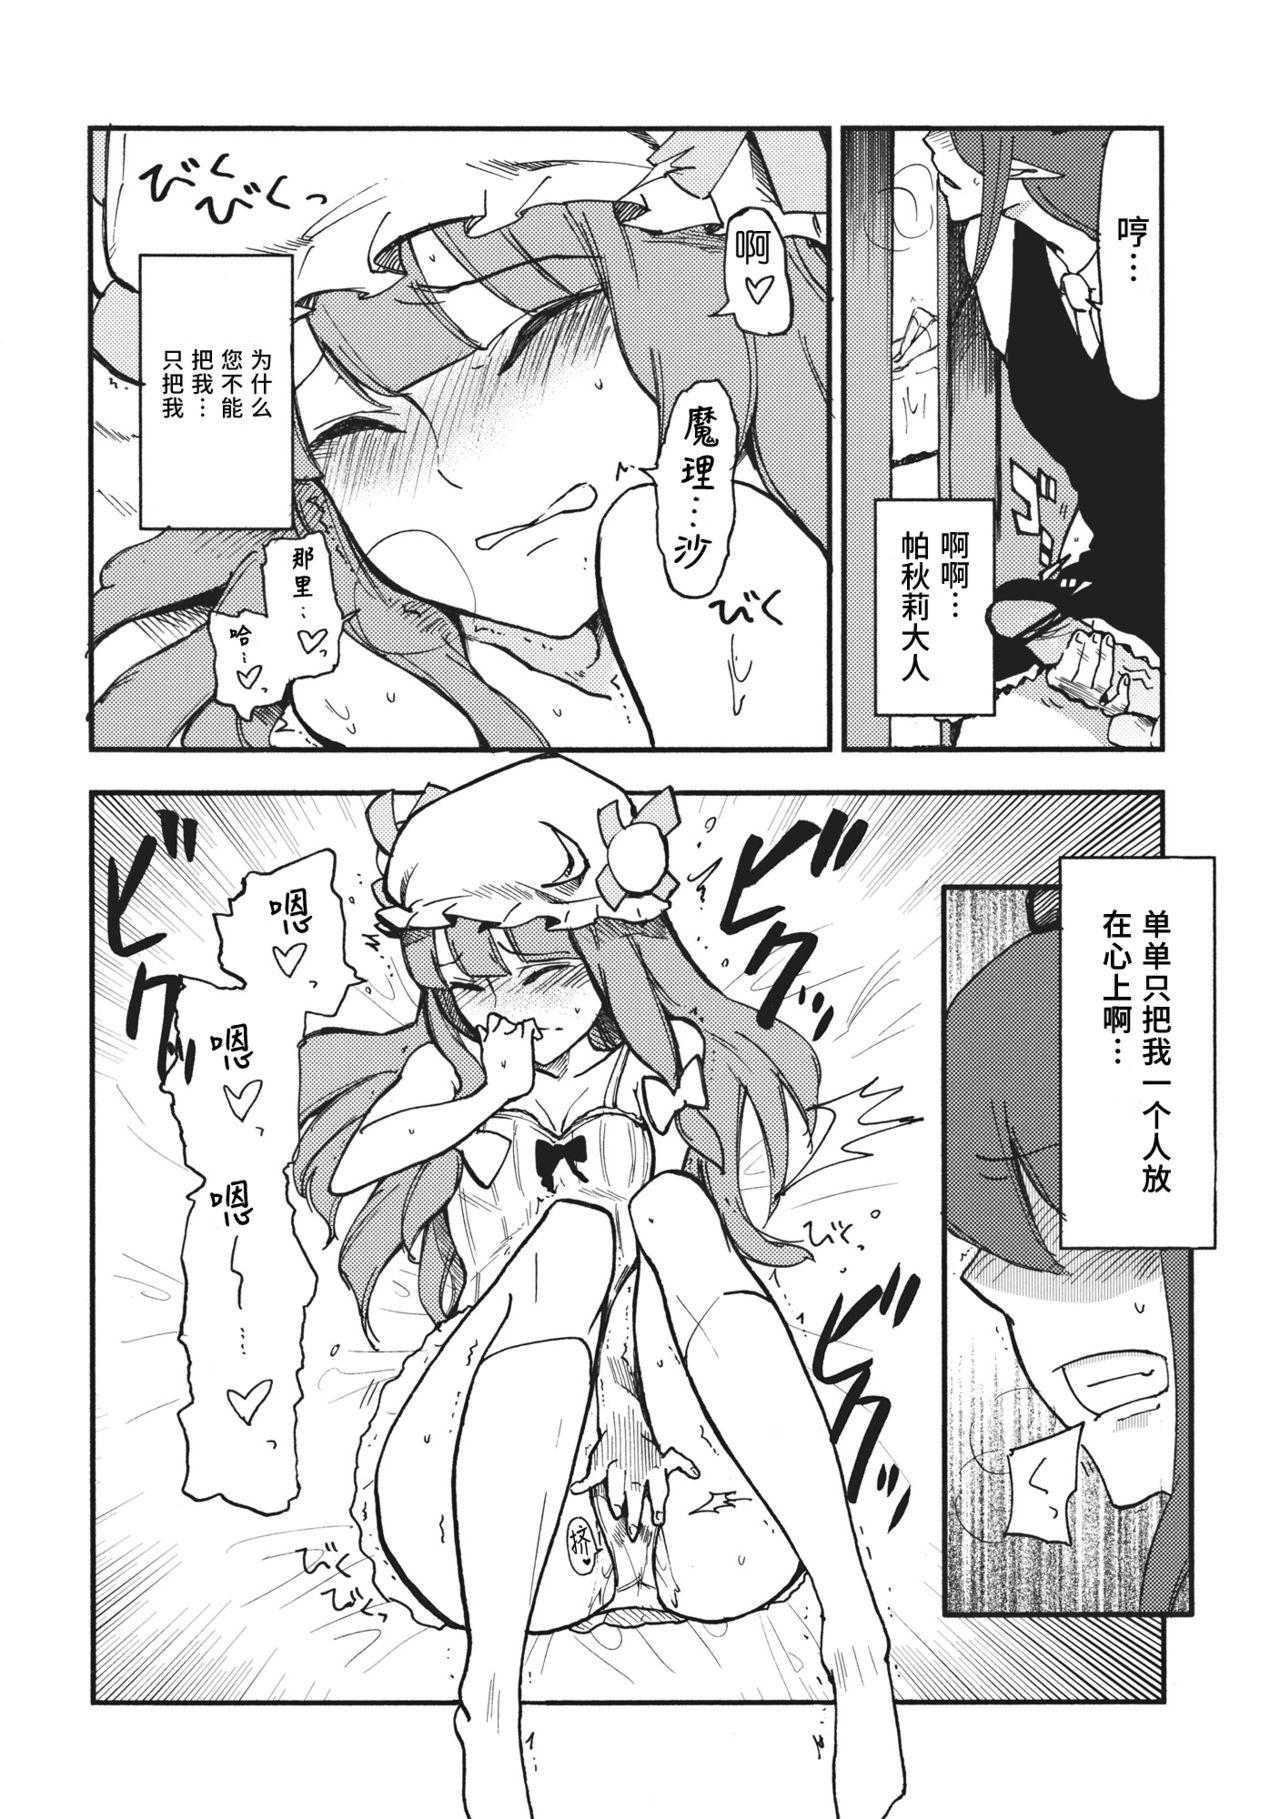 Hot Naked Girl Waisetsu Toshokan - Touhou project Point Of View - Page 4